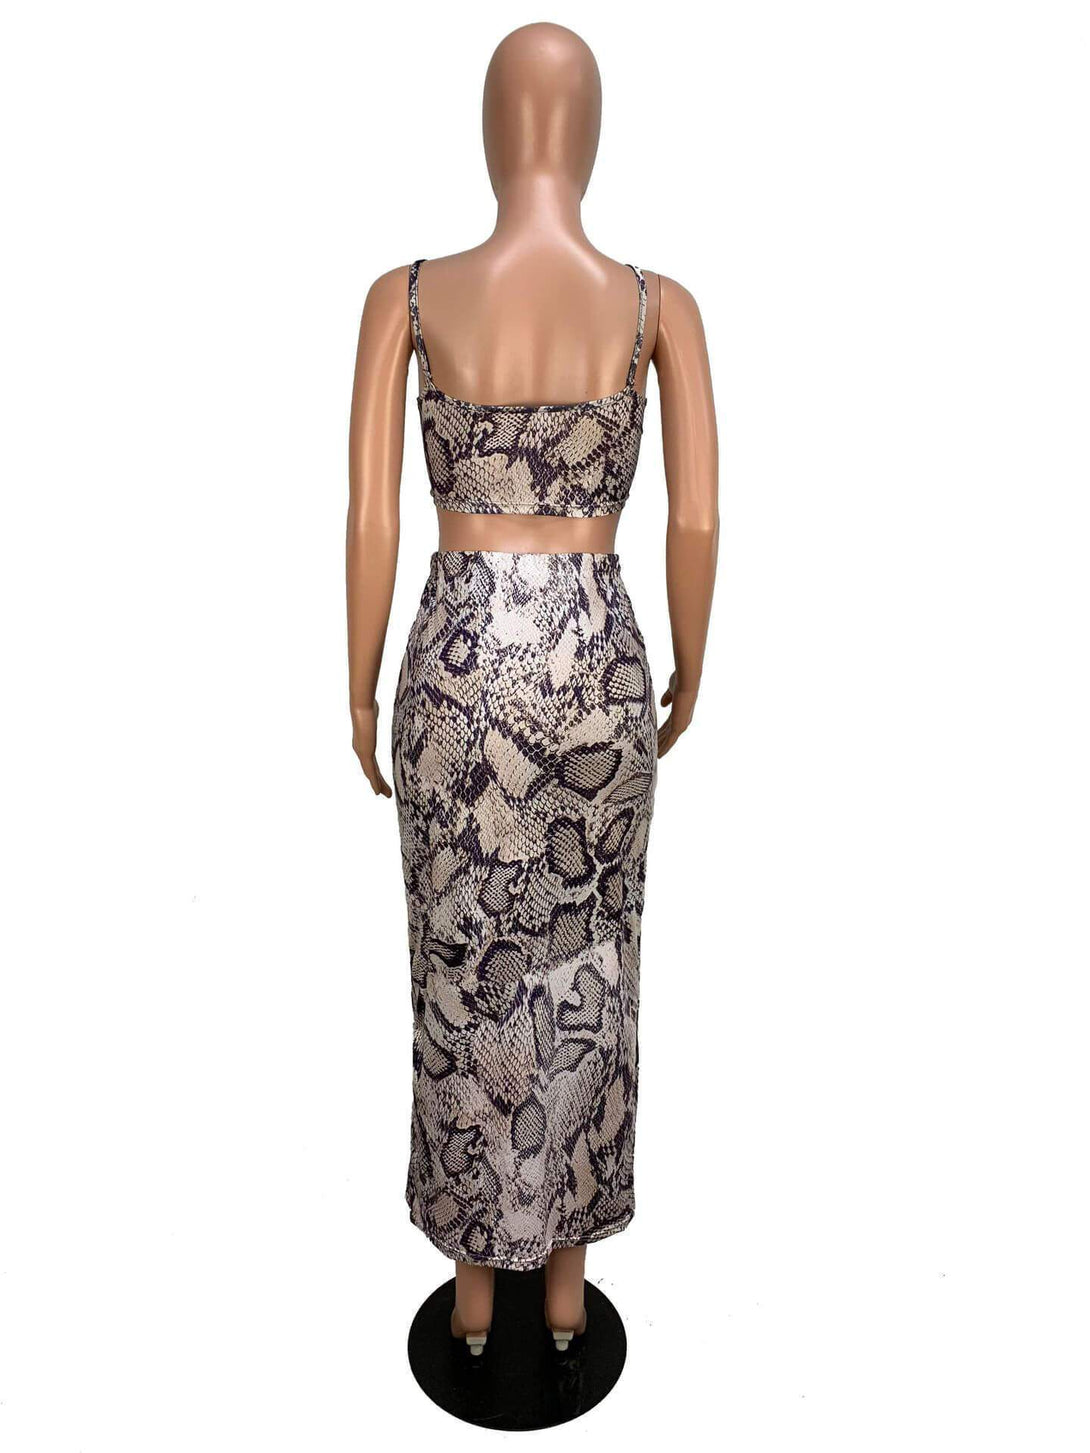 Bella Fancy Dresses US Western Wear Cropped Snake Printed Two Piece Skirt And Top